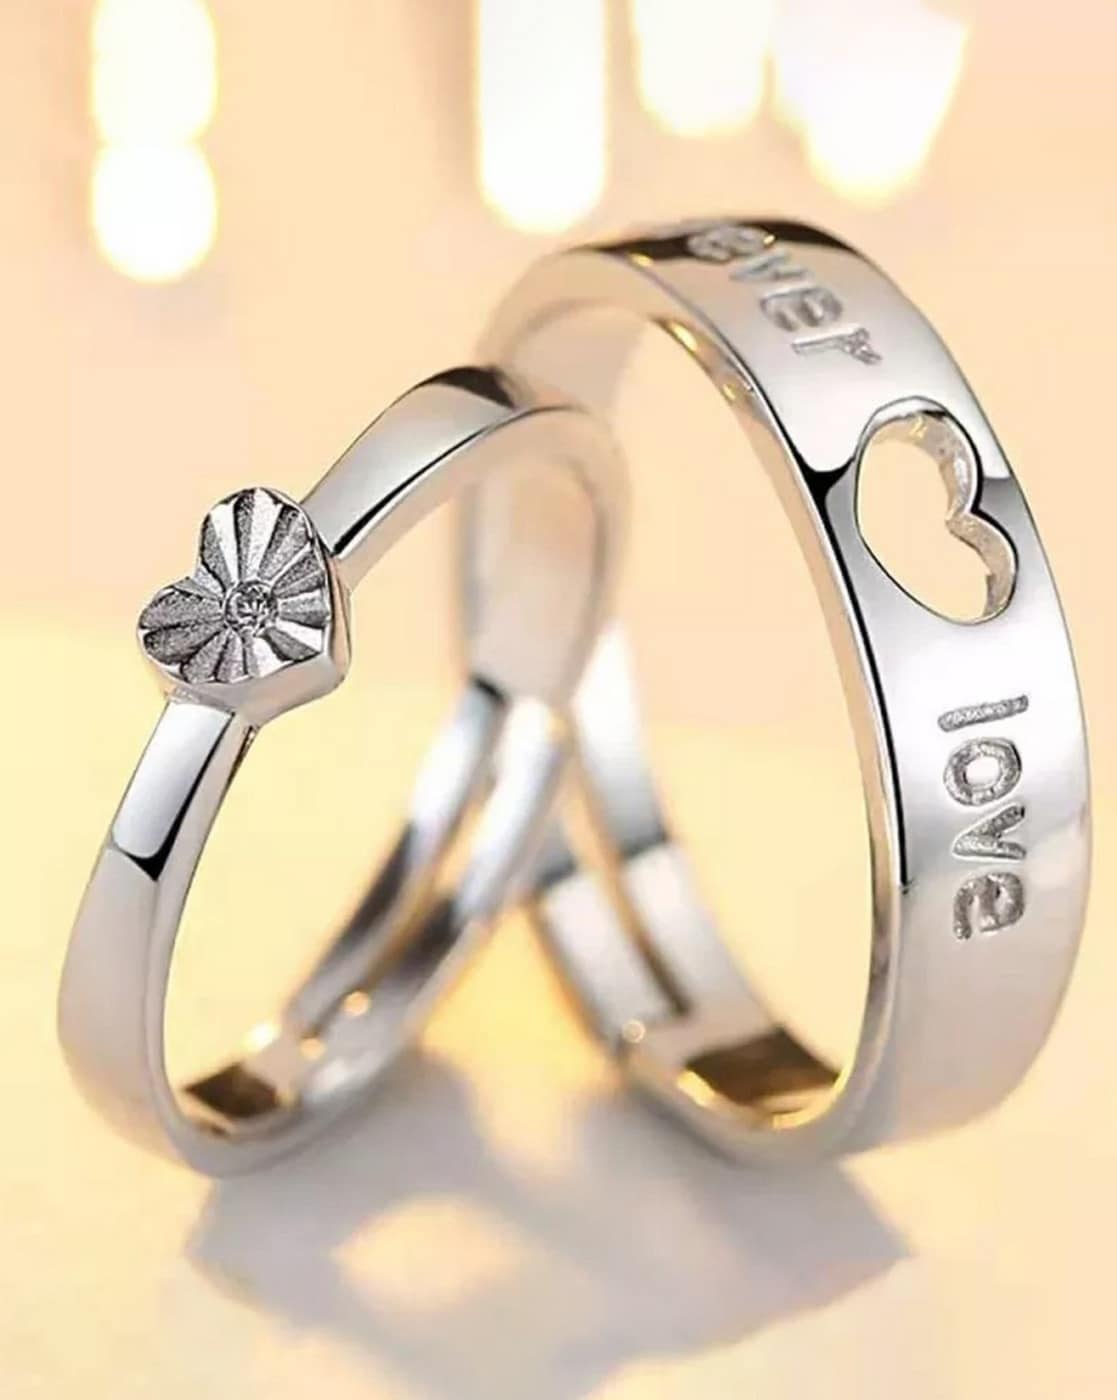 Silver Couple Ring Silver Rings for couples – Zevrr